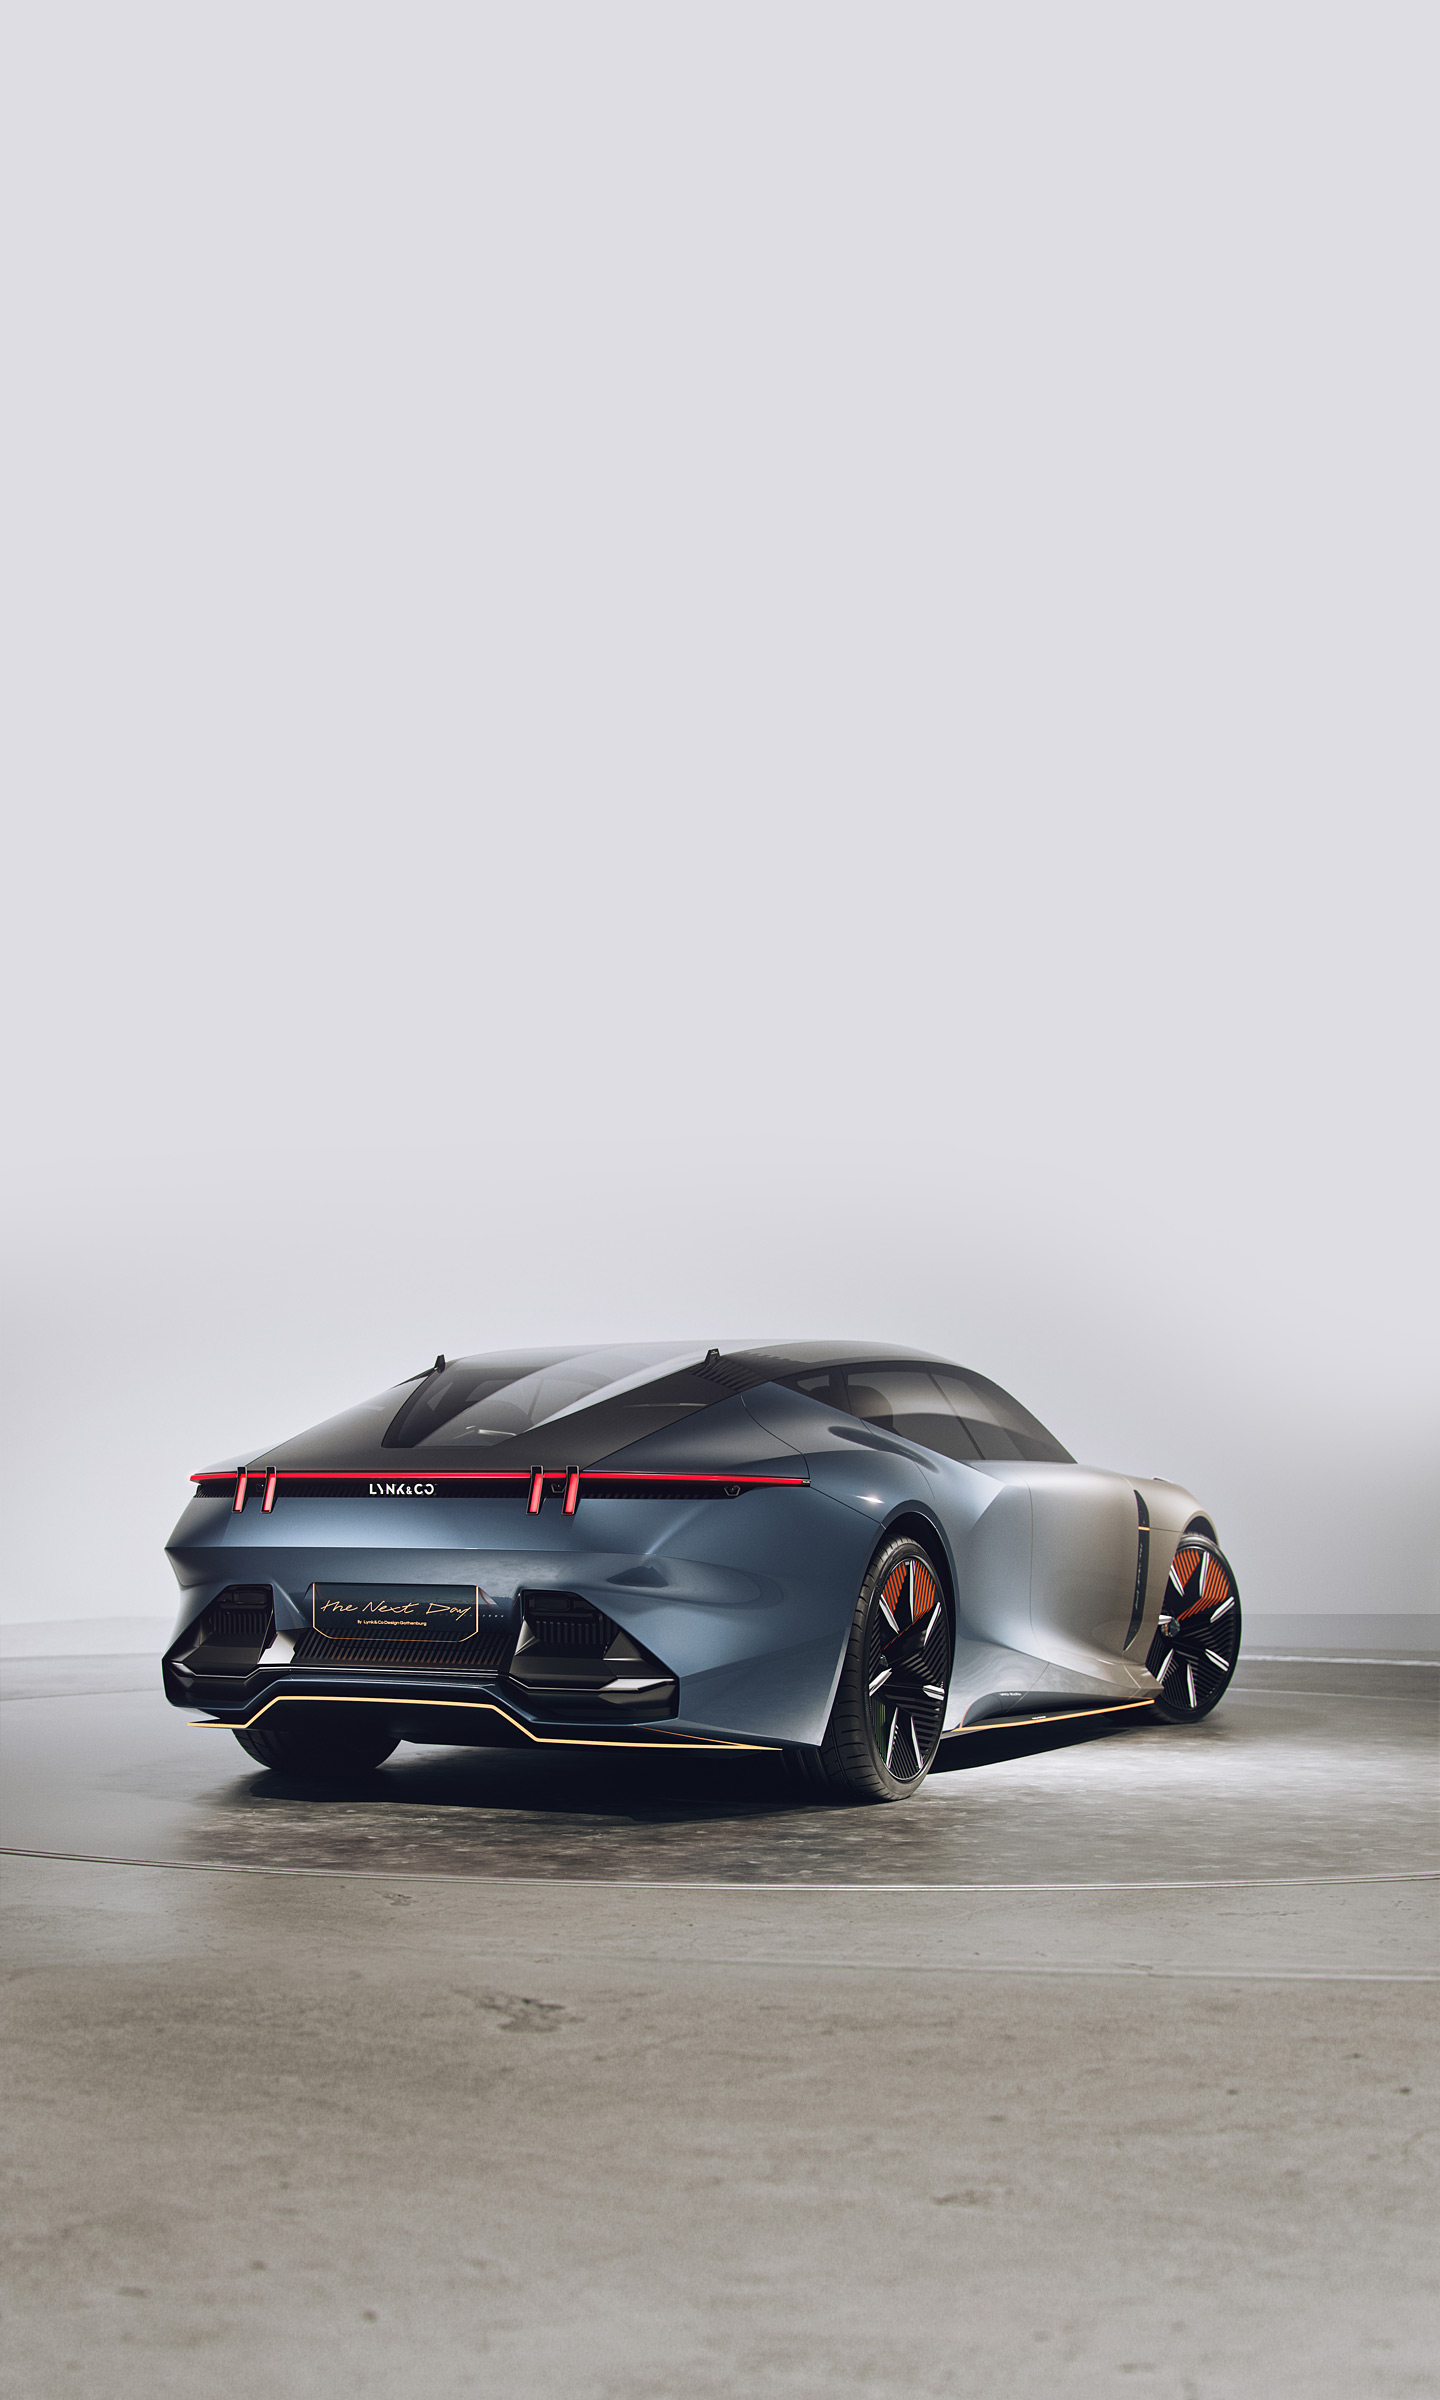  2022 Lynk Co The Next Day Concept Wallpaper.